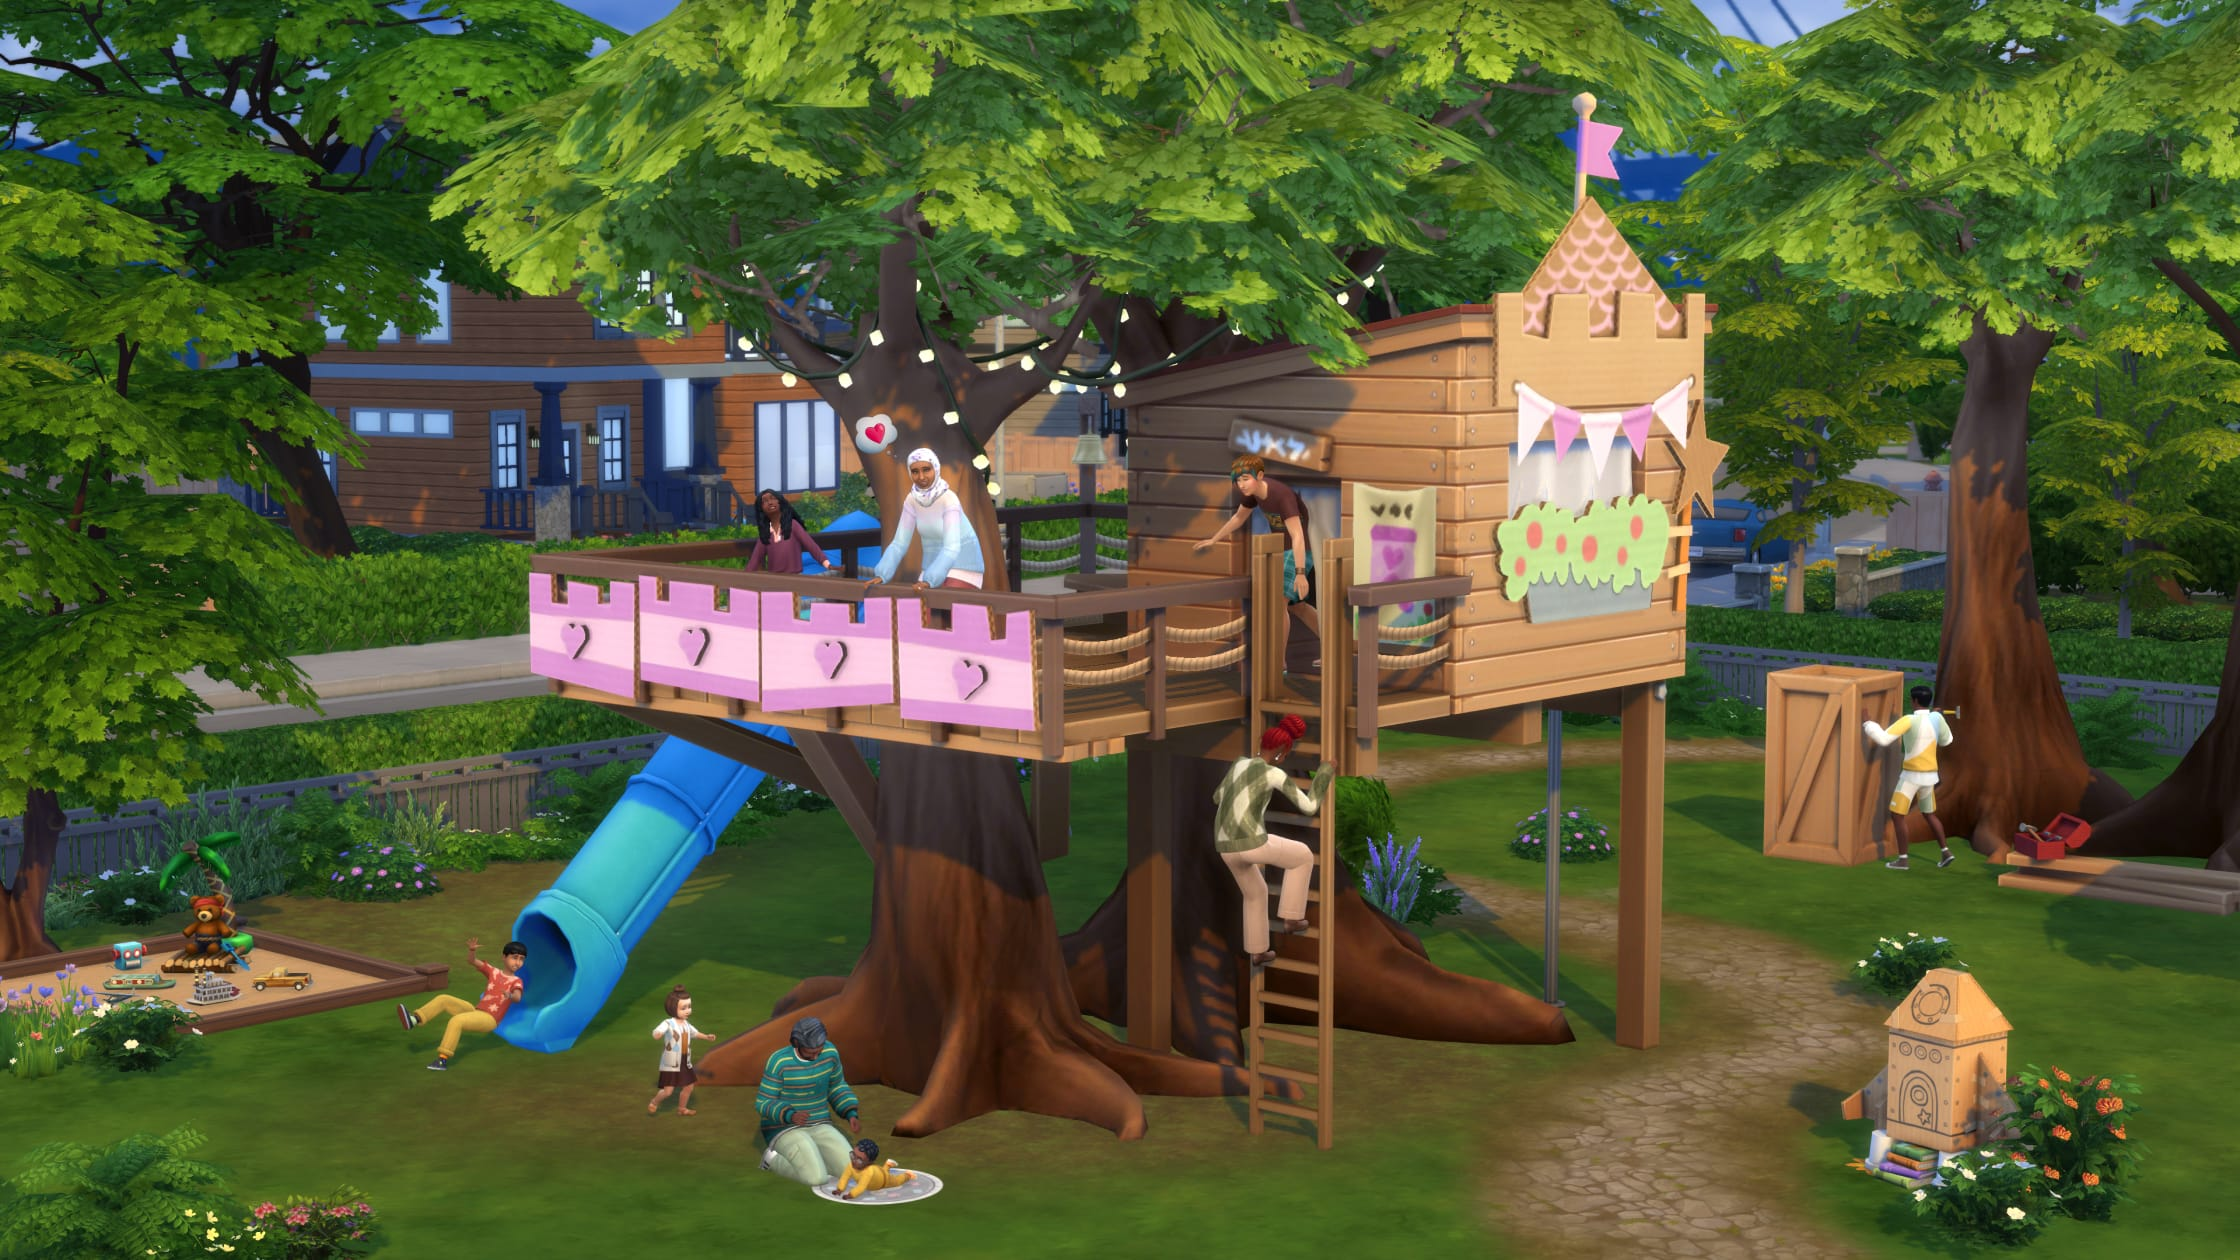 A suburban back garden in The Sims 4, with the central focus of the image on a large treehouse. Several Sims are on the deck of the treehouse or climbing the ladder up to its enclosed indoor space. Elsewhere in the garden, young Sims play on slides, in sandboxes, and on playmats, while others build wooden projects.